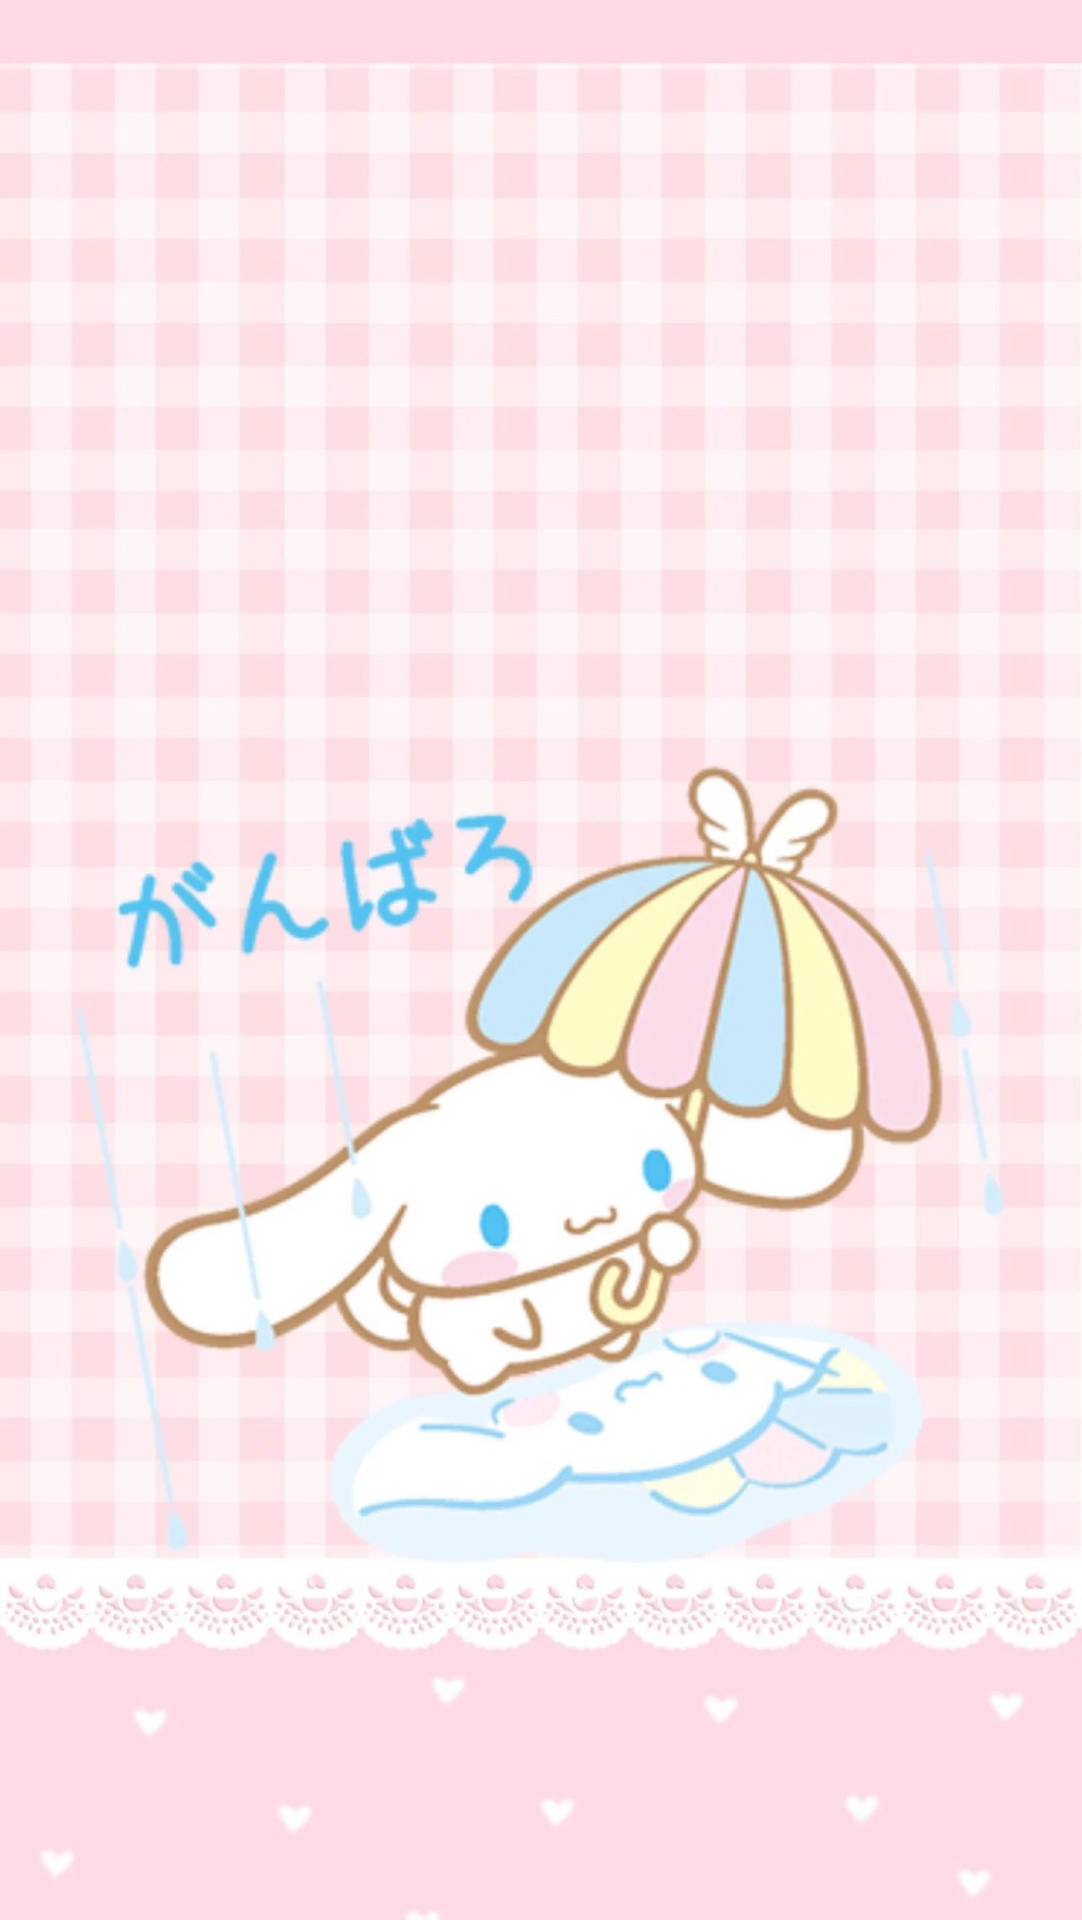 Pastel Cute Bunny With Umbrella Background